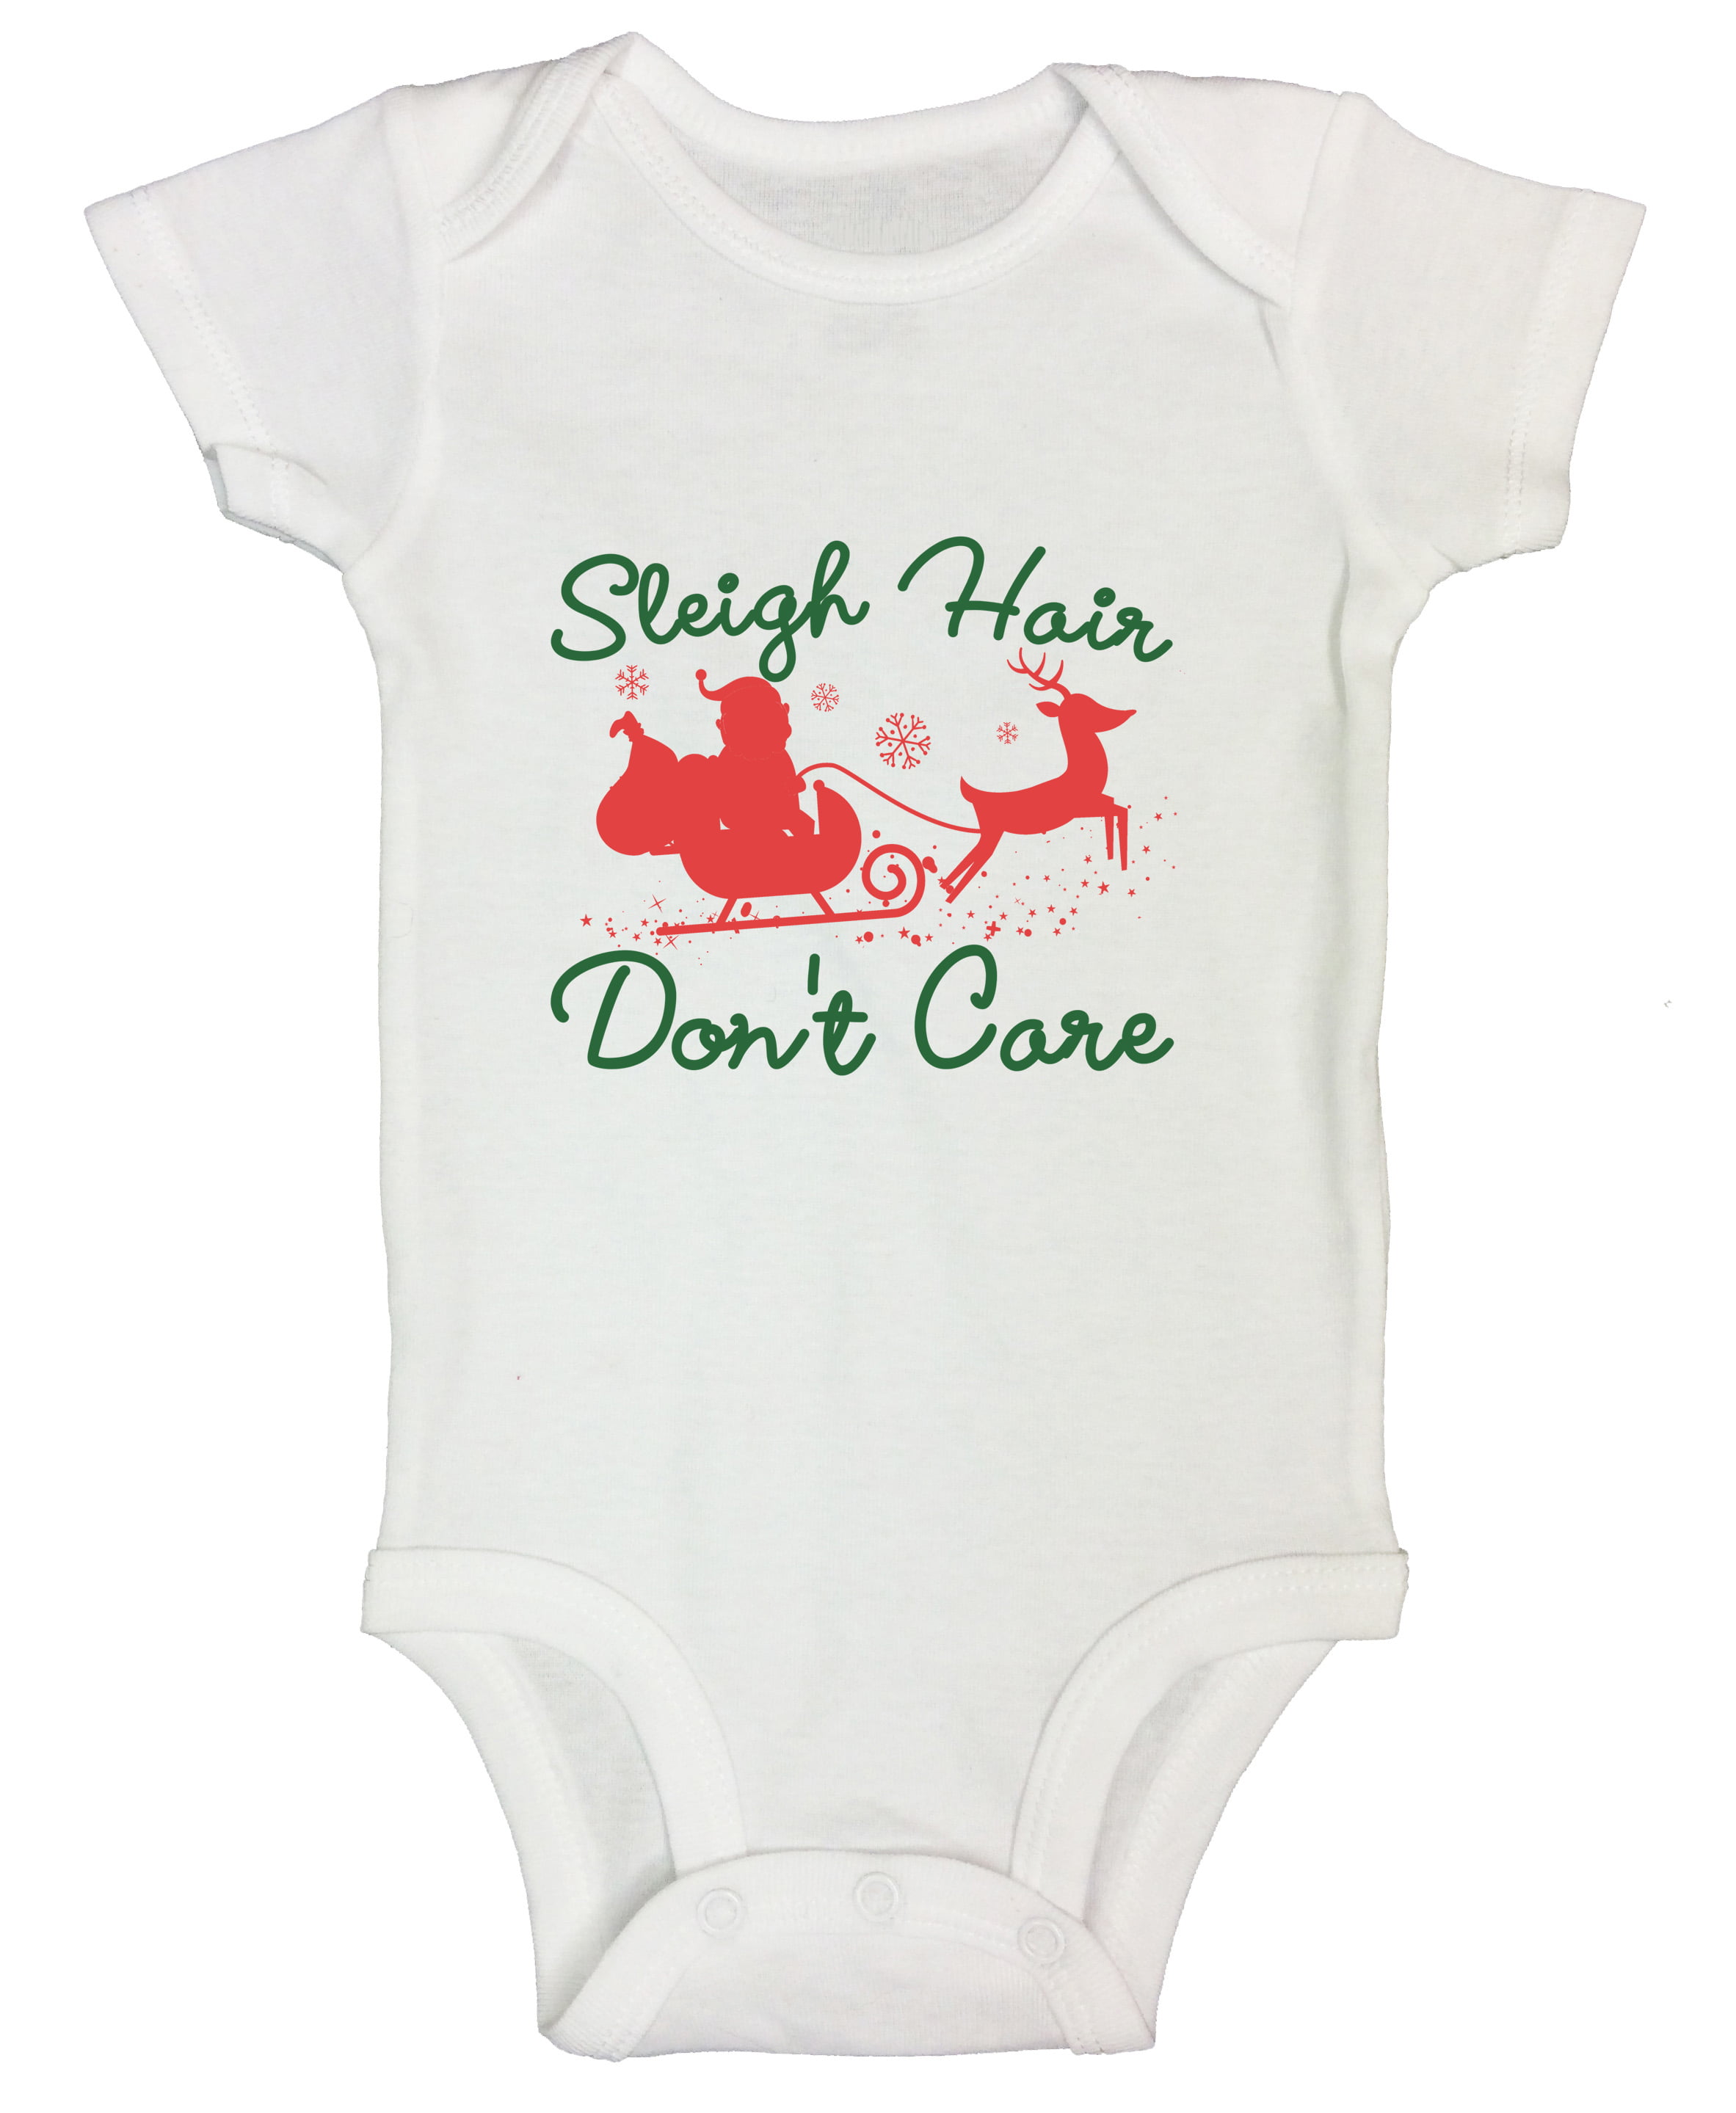 Baby Boy Jumpsuit Soft Onesie Snowman and Sleigh with Gifts Romper Long Sleeve Bodysuit for Girl 